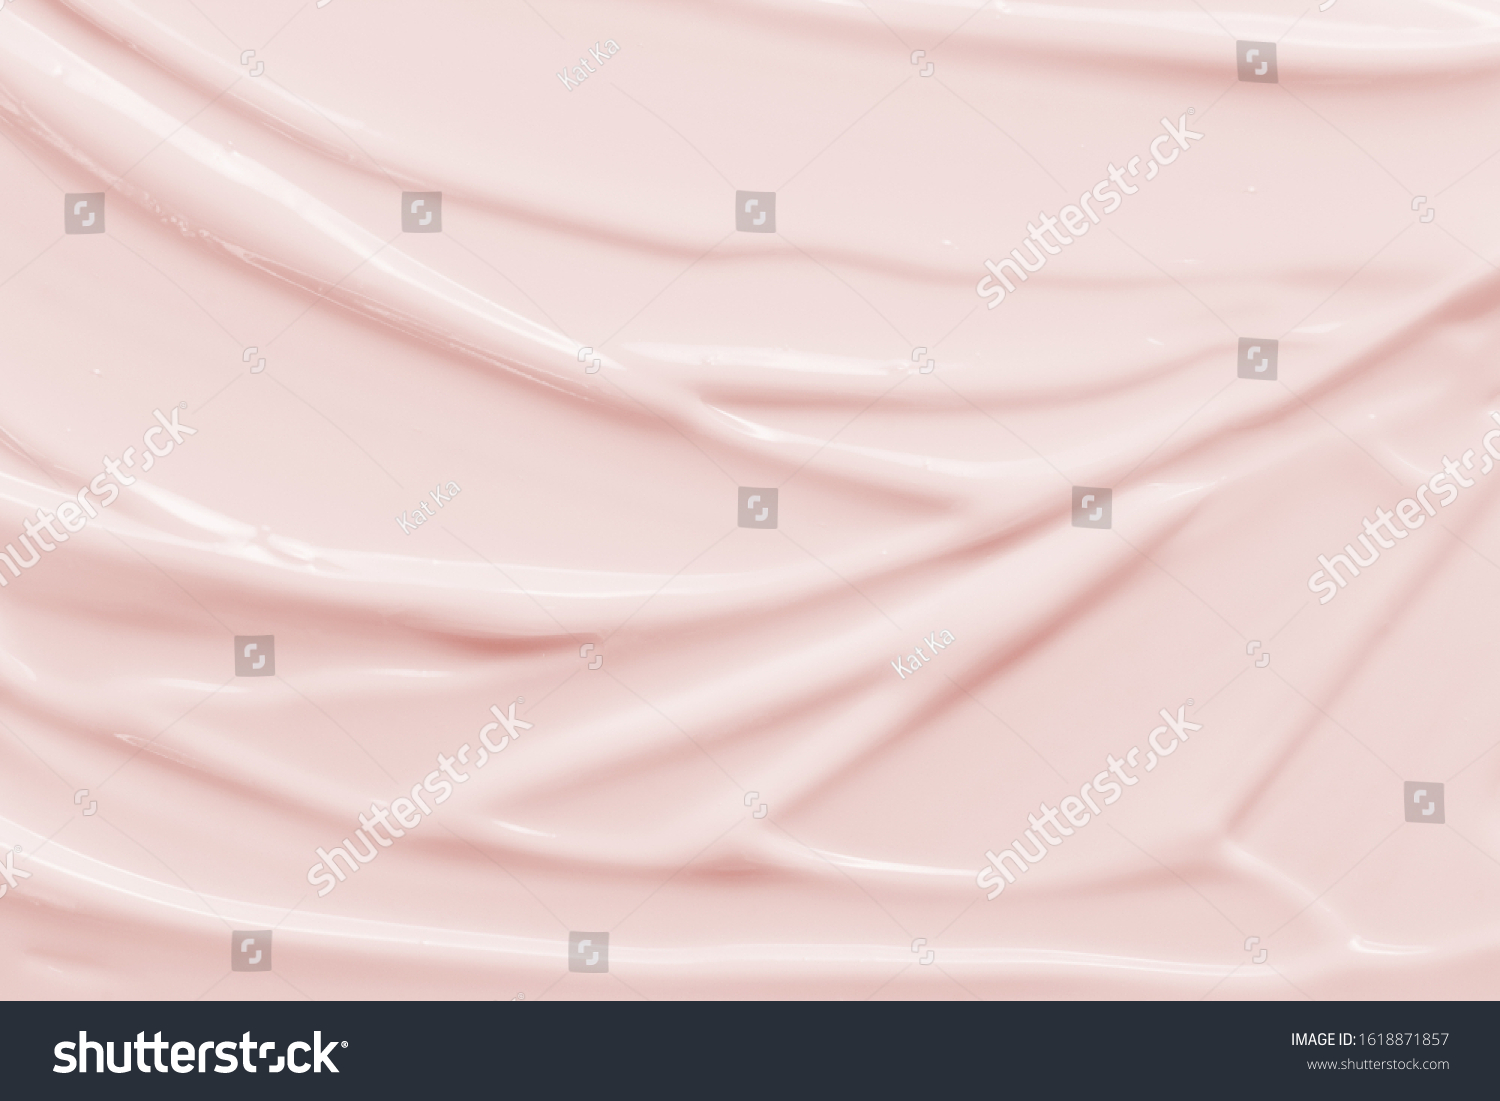 Beauty cream texture background. Pink color face cream lotion moisturizer smear. Skincare cosmetic  product  strokes #1618871857